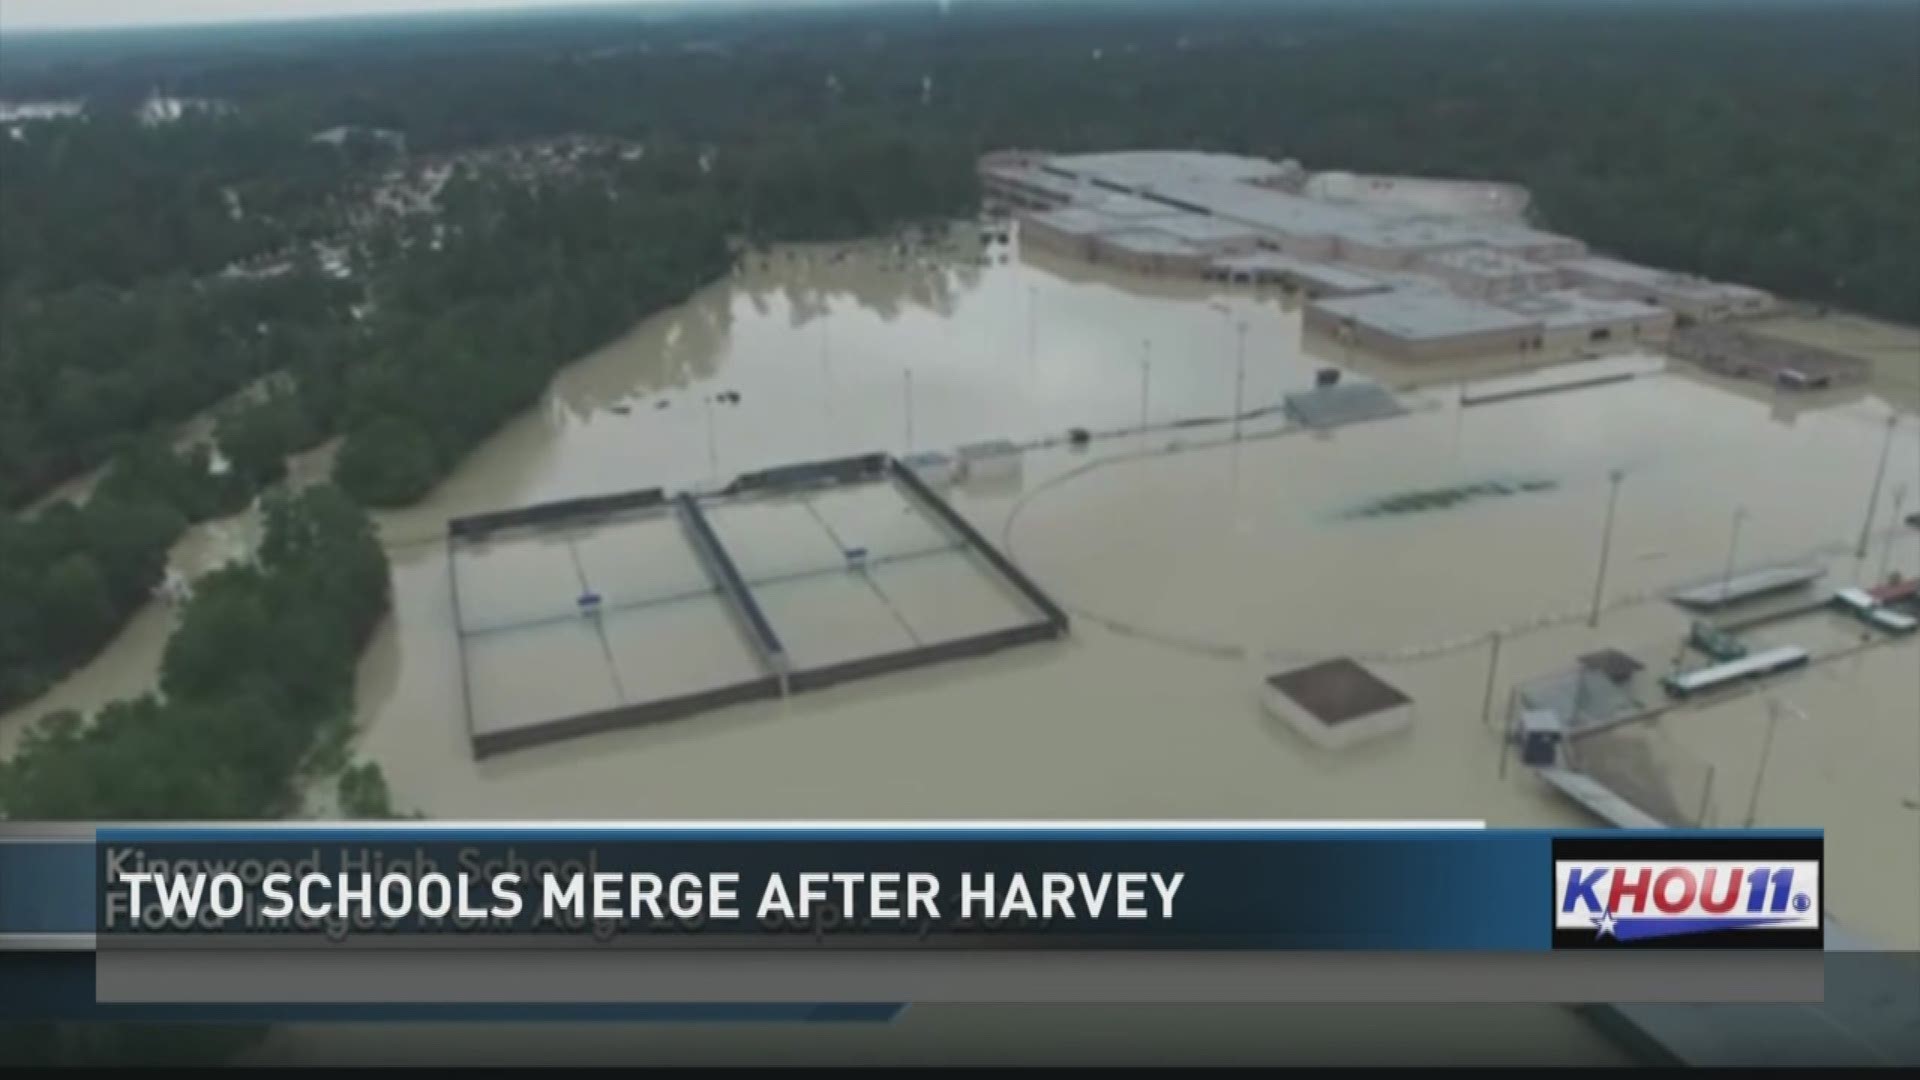 Two Humble ISD schools will share a campus after Kingwood High School was damaged by flooding from Harvey.